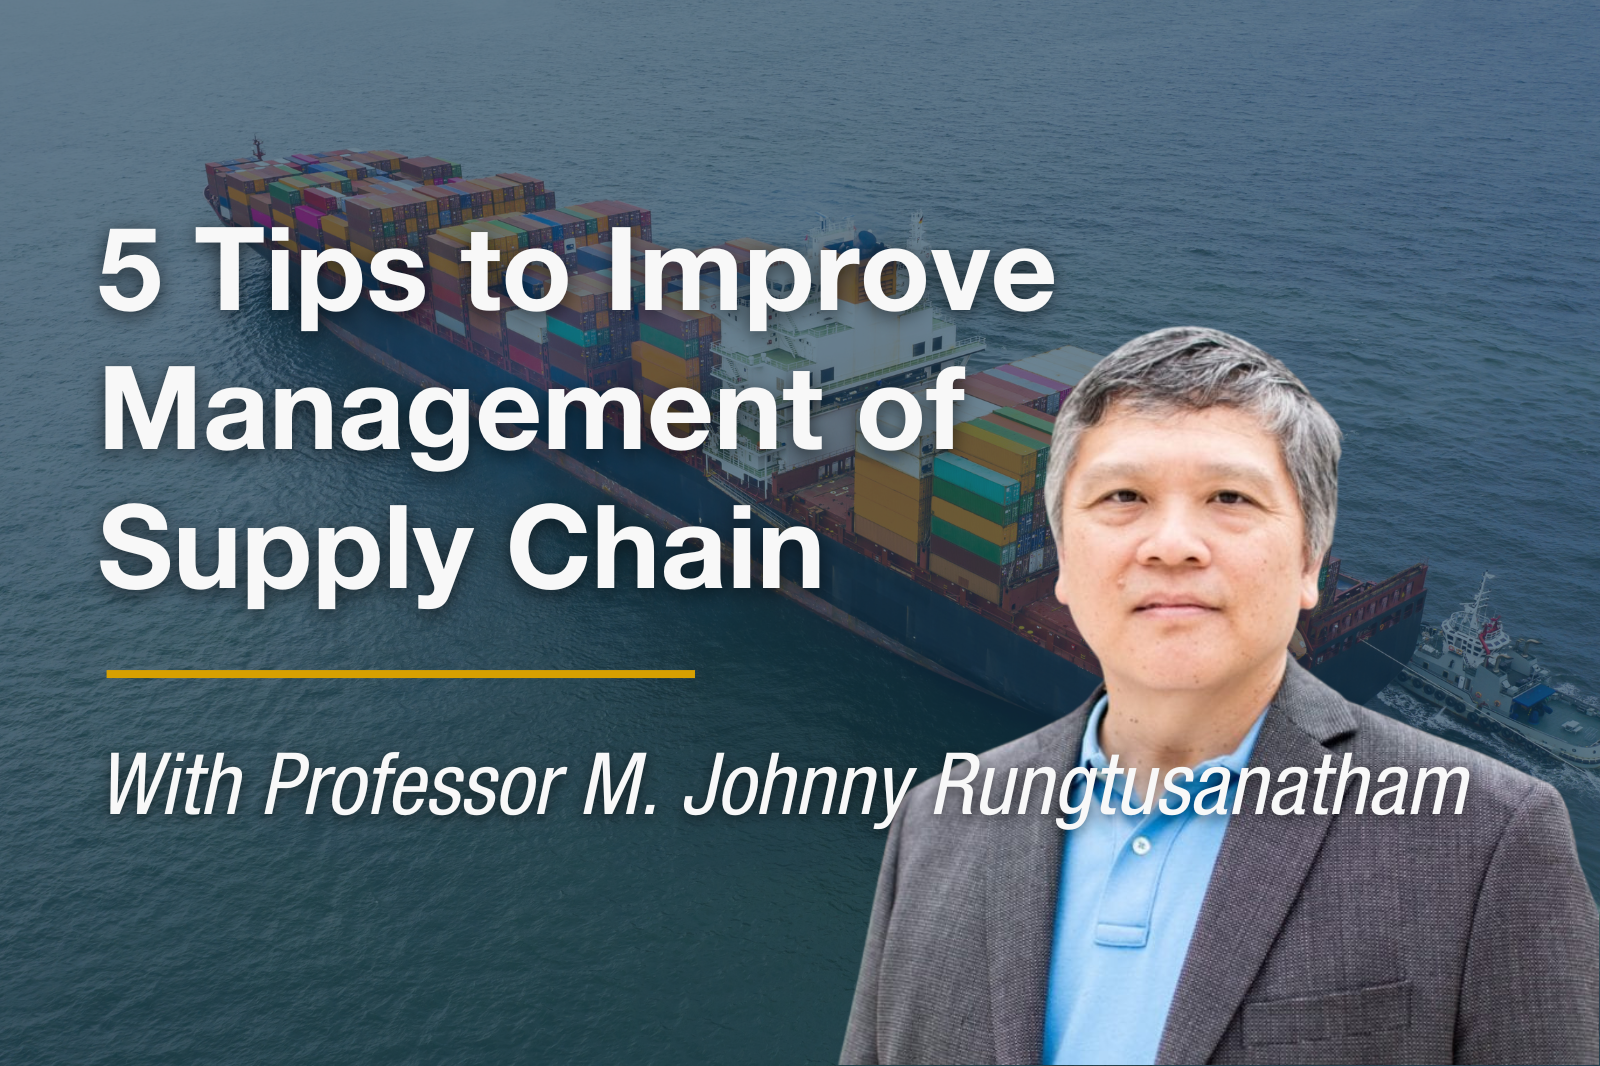 headshot of Professor M. Johnny Rungtusanatham with overlaying title: 5 TIPS TO IMPROVE MANAGEMENT OF SUPPLY CHAINS